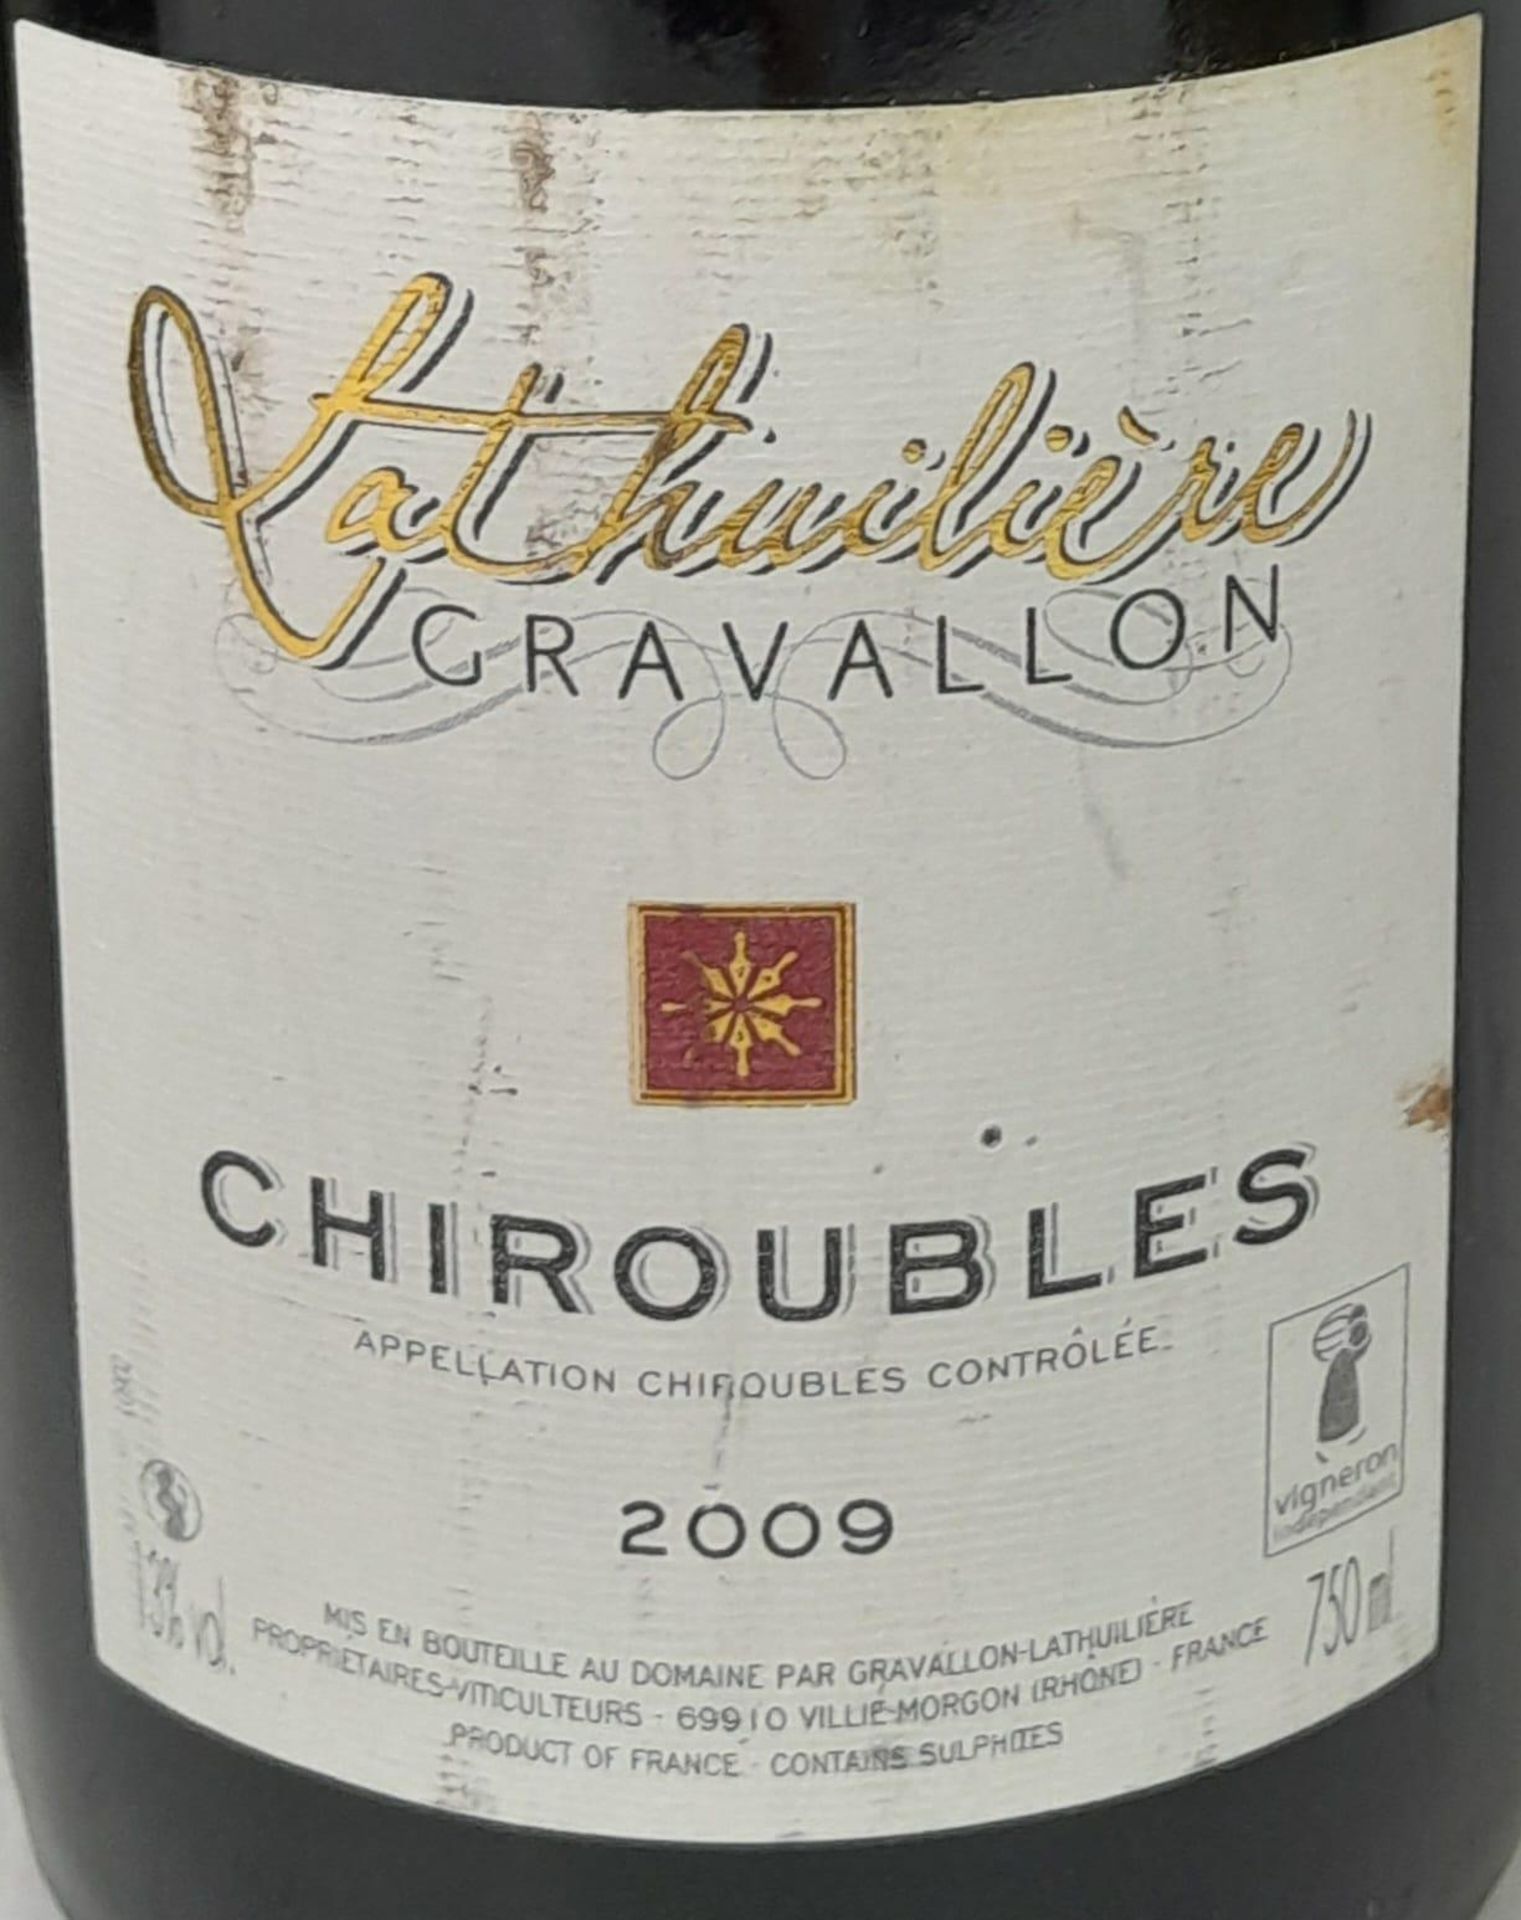 6 Bottles of Cru Beaujolais Consisting of: 2 x Chiroubles Domaine Gravallon Lathuliere 2009 2 x - Image 5 of 10